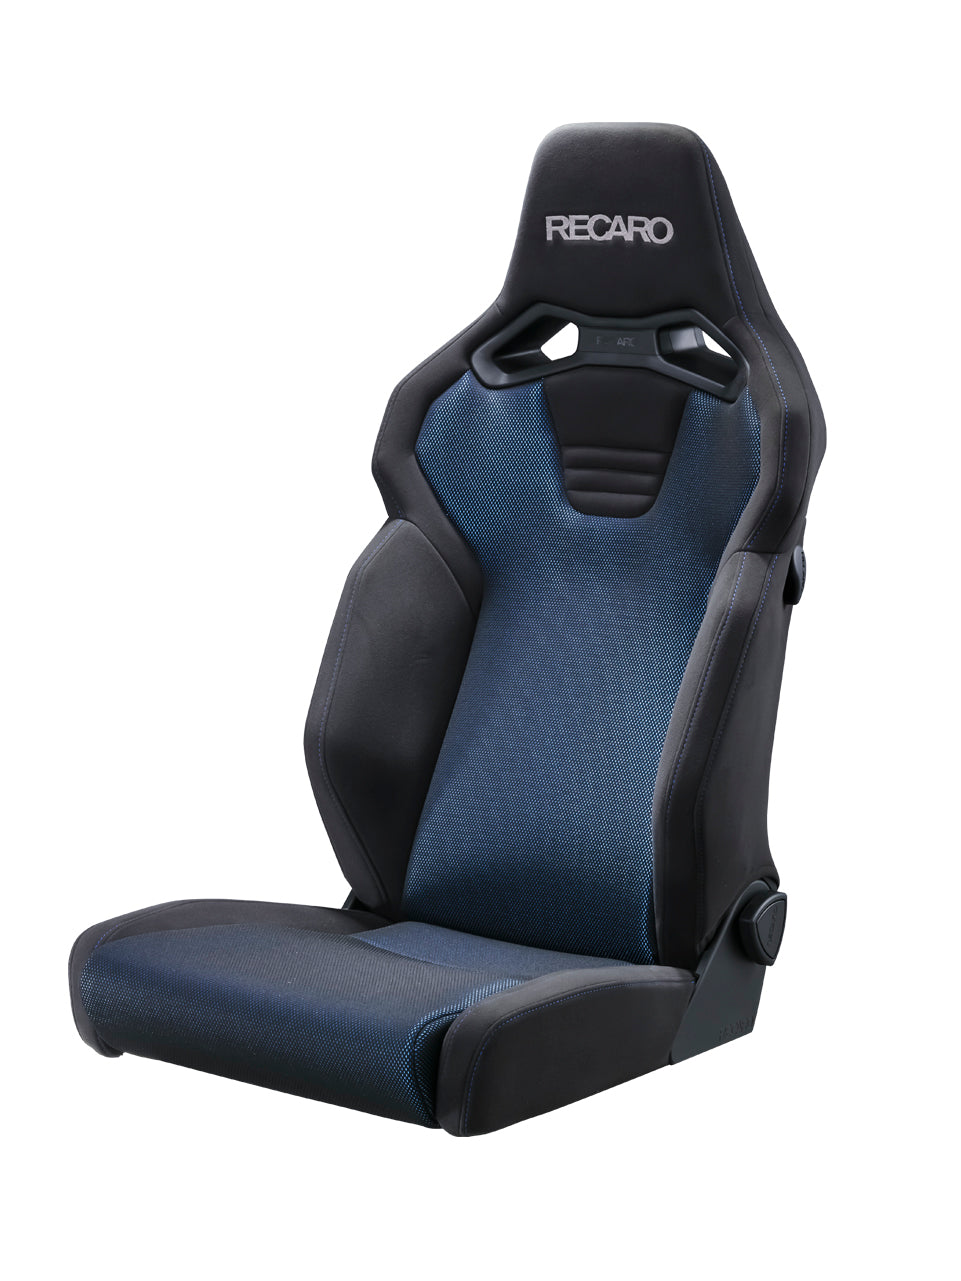 RECARO SR-C BK100H BL BK BRILLIANT MESH BLUE AND KAMUI BLACK COLOR WITH HEATED SEATS FOR  81-121.21.643-0